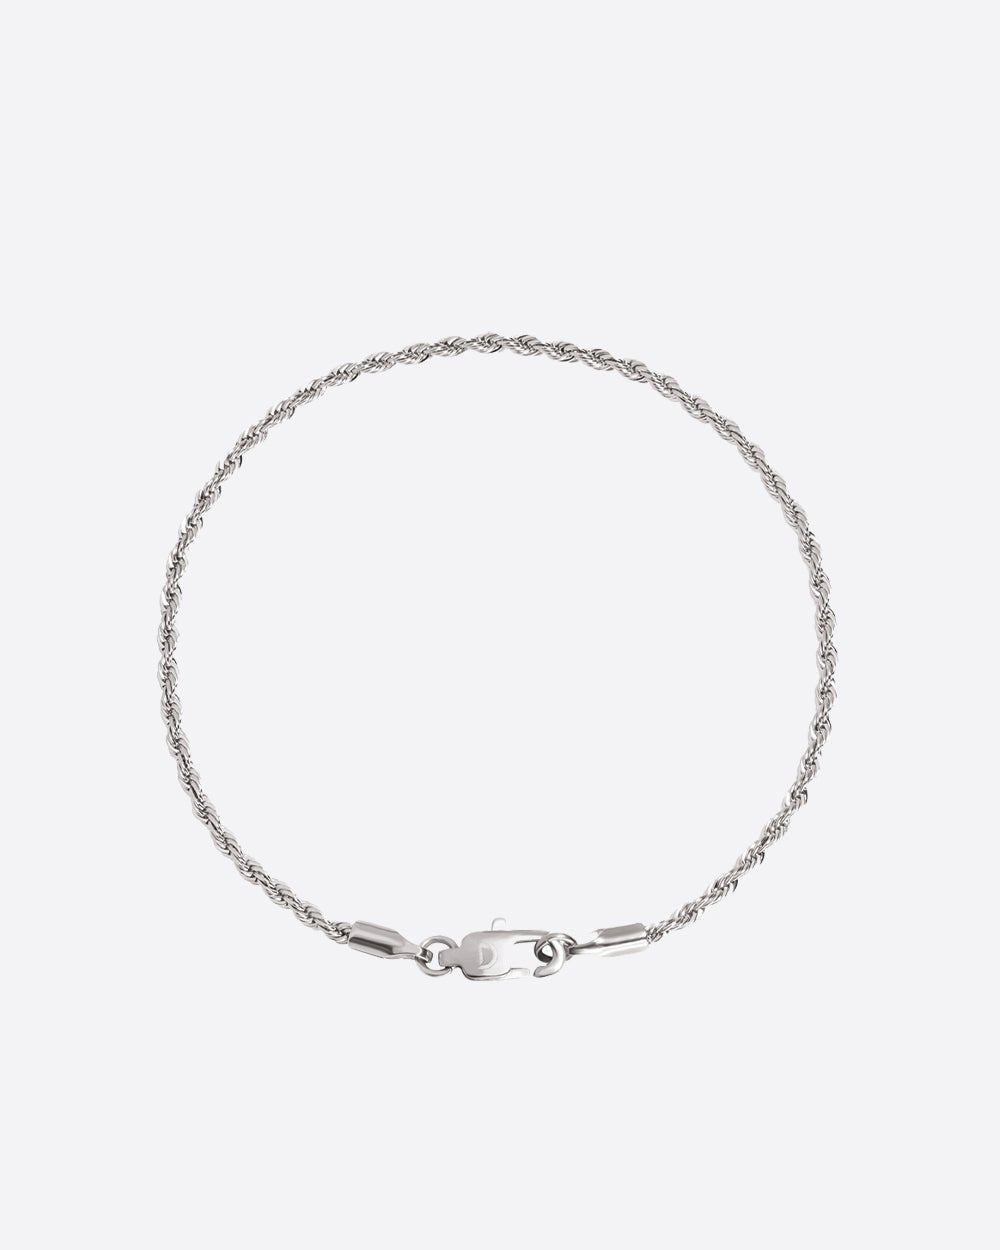 CLEAN ROPE BRACELET. - 2MM WHITE GOLD - Drippy Amsterdam